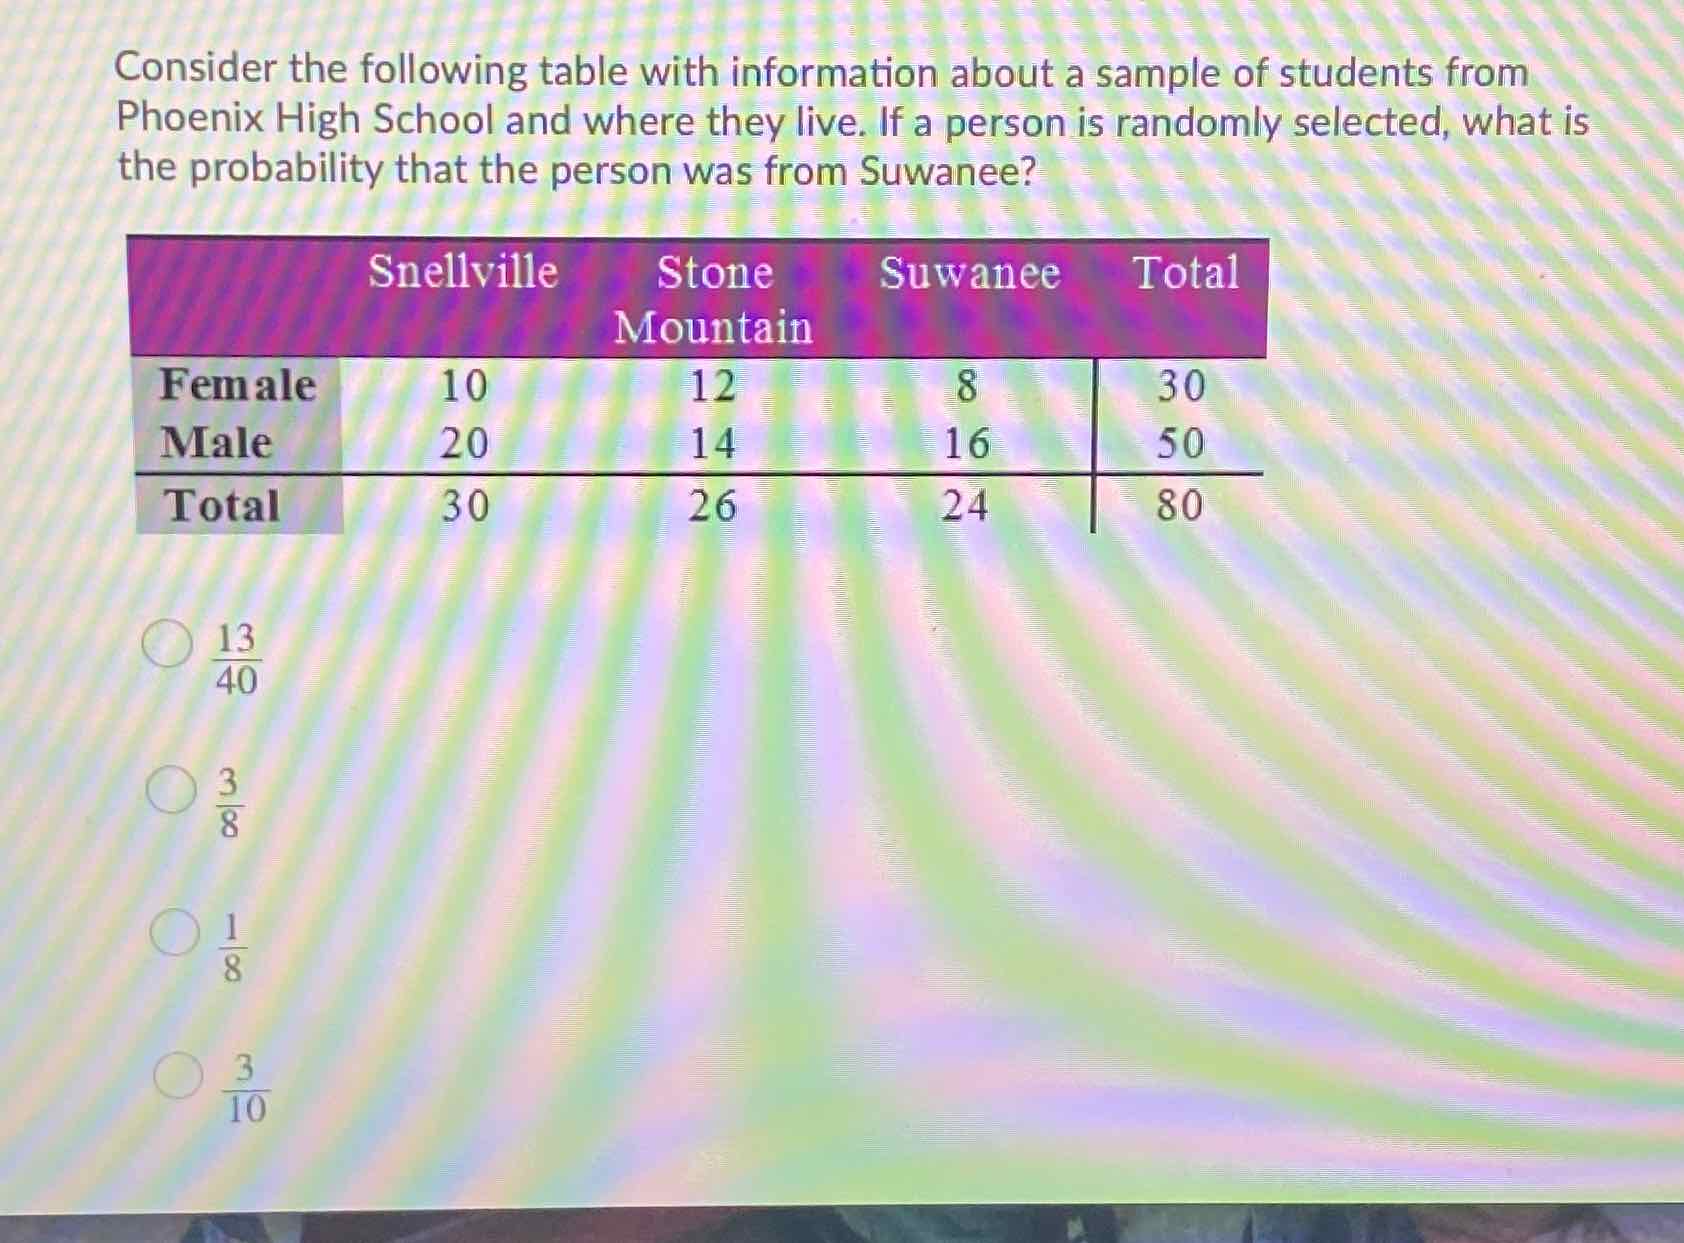 Consider the following table with information about a sample of students from Phoenix High School and where they live. If a person is randomly selected, what is the probability that the person was from Suwanee?
\begin{tabular}{lccc|c}
\hline & Snellville & Stone Mountain & Suwanee & Total \\
\hline Female & 10 & 12 & 8 & 30 \\
Male & 20 & 14 & 16 & 50 \\
\hline Total & 30 & 26 & 24 & 80 \\
\hline
\end{tabular}
\( \frac{13}{40} \)
\( \frac{3}{8} \)
\( \frac{1}{8} \)
\( \frac{3}{10} \)